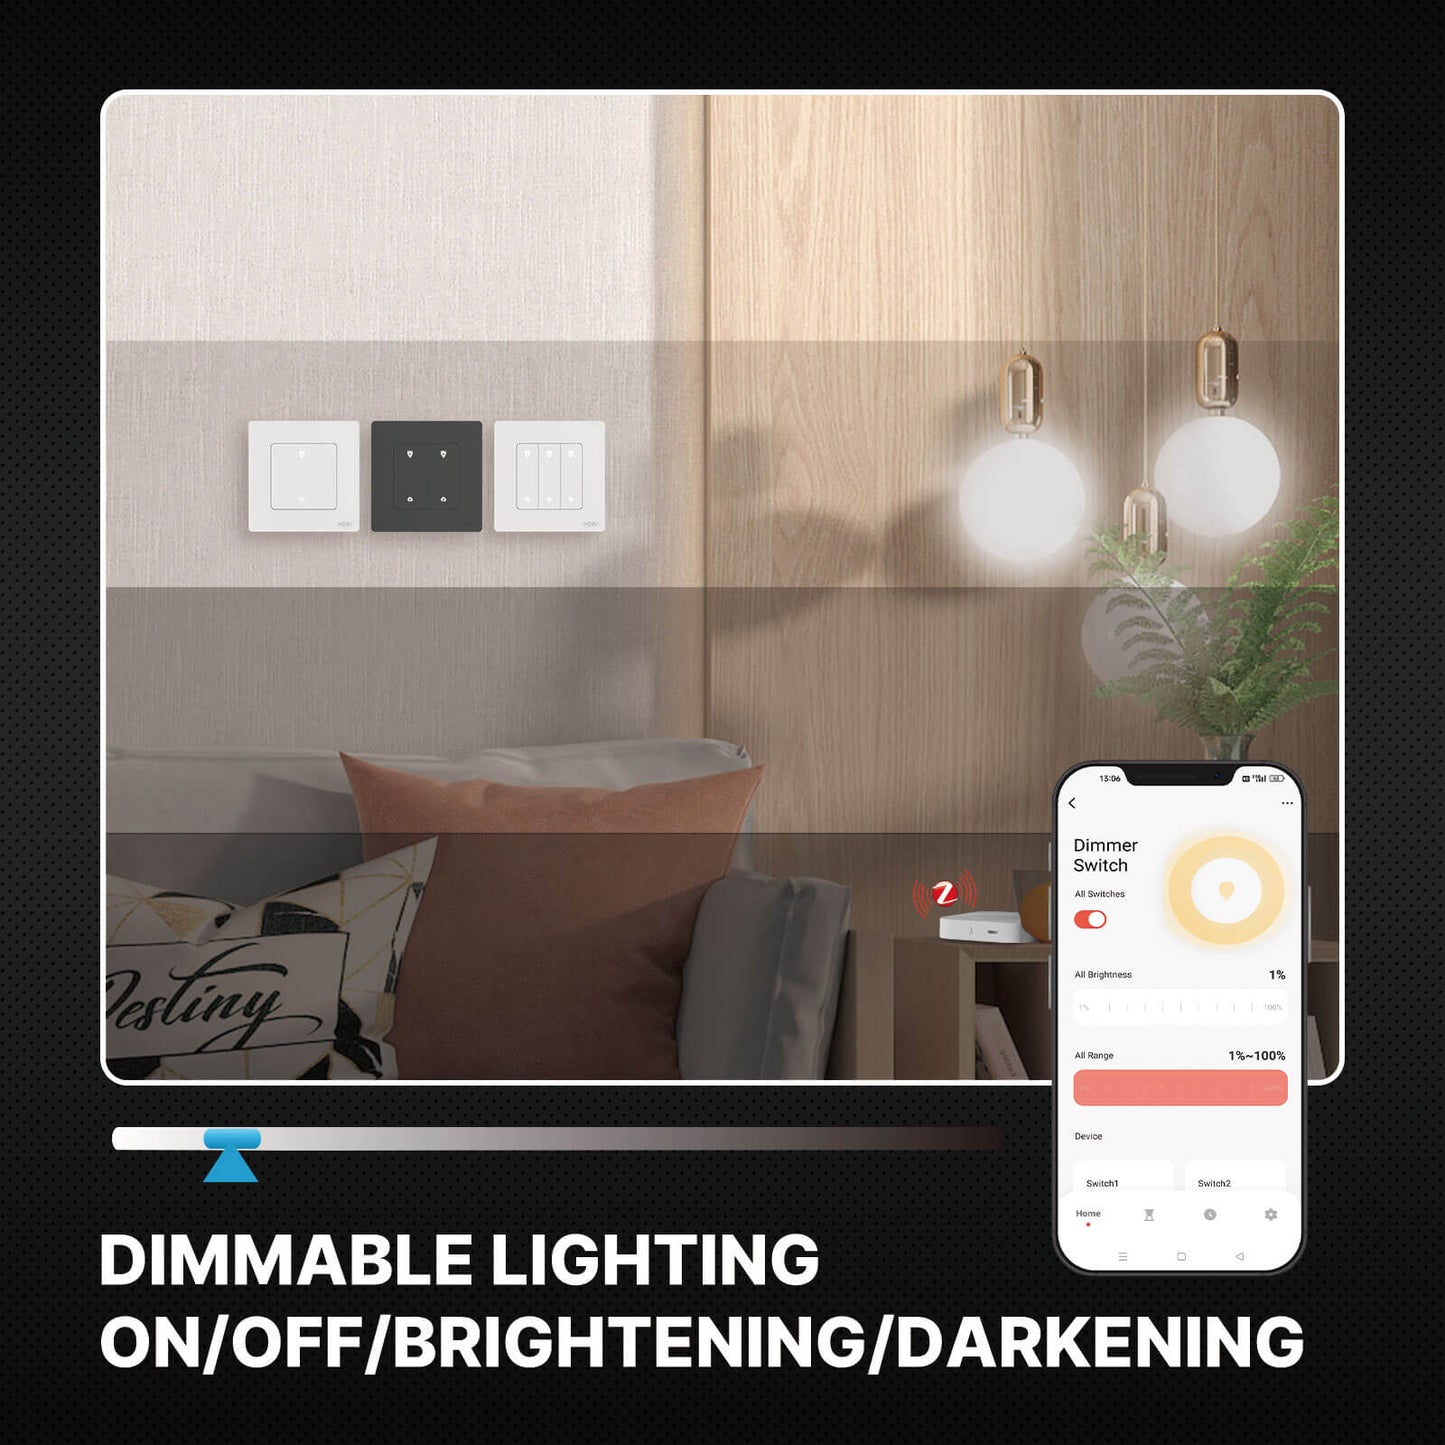 MOES Star Ring ZigBee Smart Dimmer Switch for Light Dimming Work with Alexa Google Home Dimmable 1-3Gang - MOES